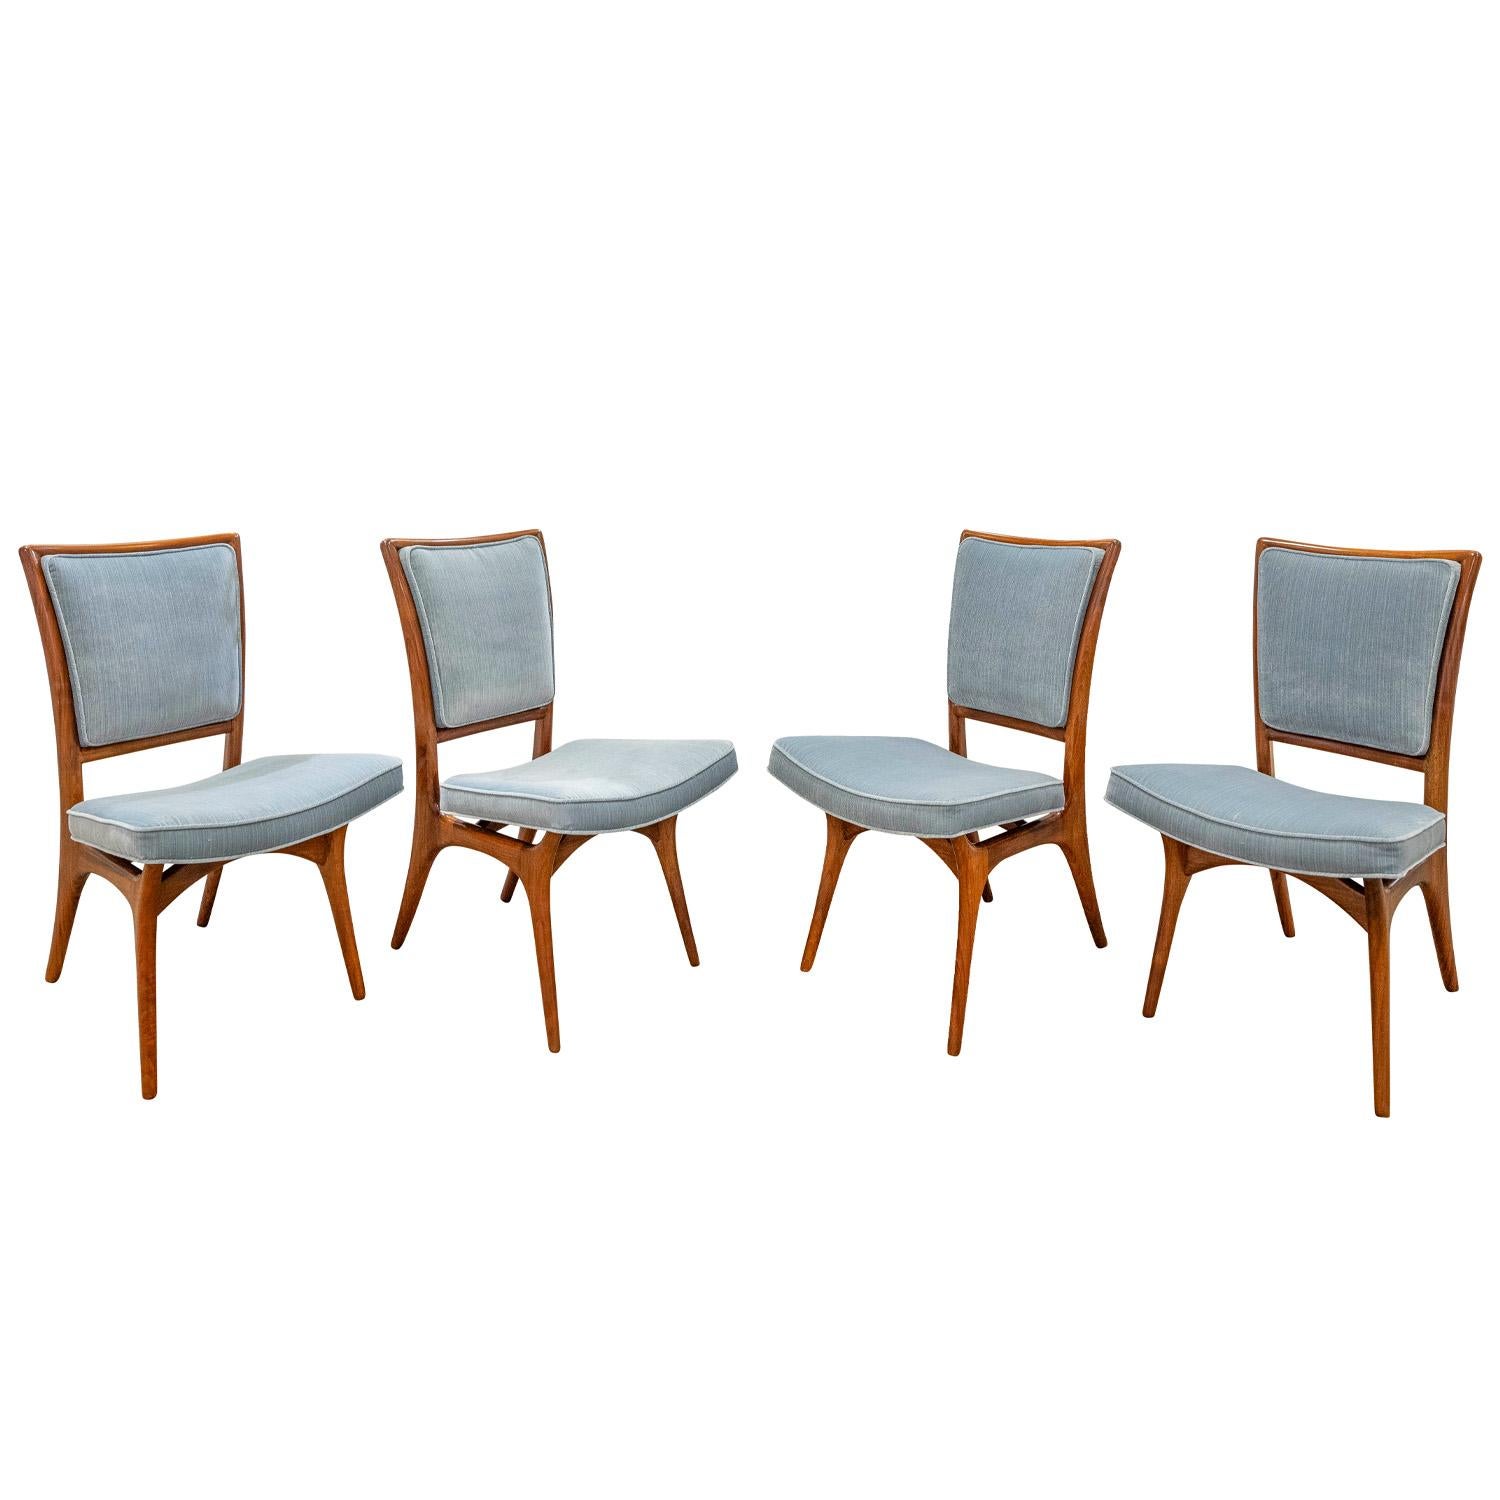 Set of 4 iconic and rare dining/game chairs model  175A in sculpted walnut with upholstered seats and backs by Vladimir Kagan, American 1950's.  These stunning chairs have been refinished and newly upholstered in light blue velvet.  They are